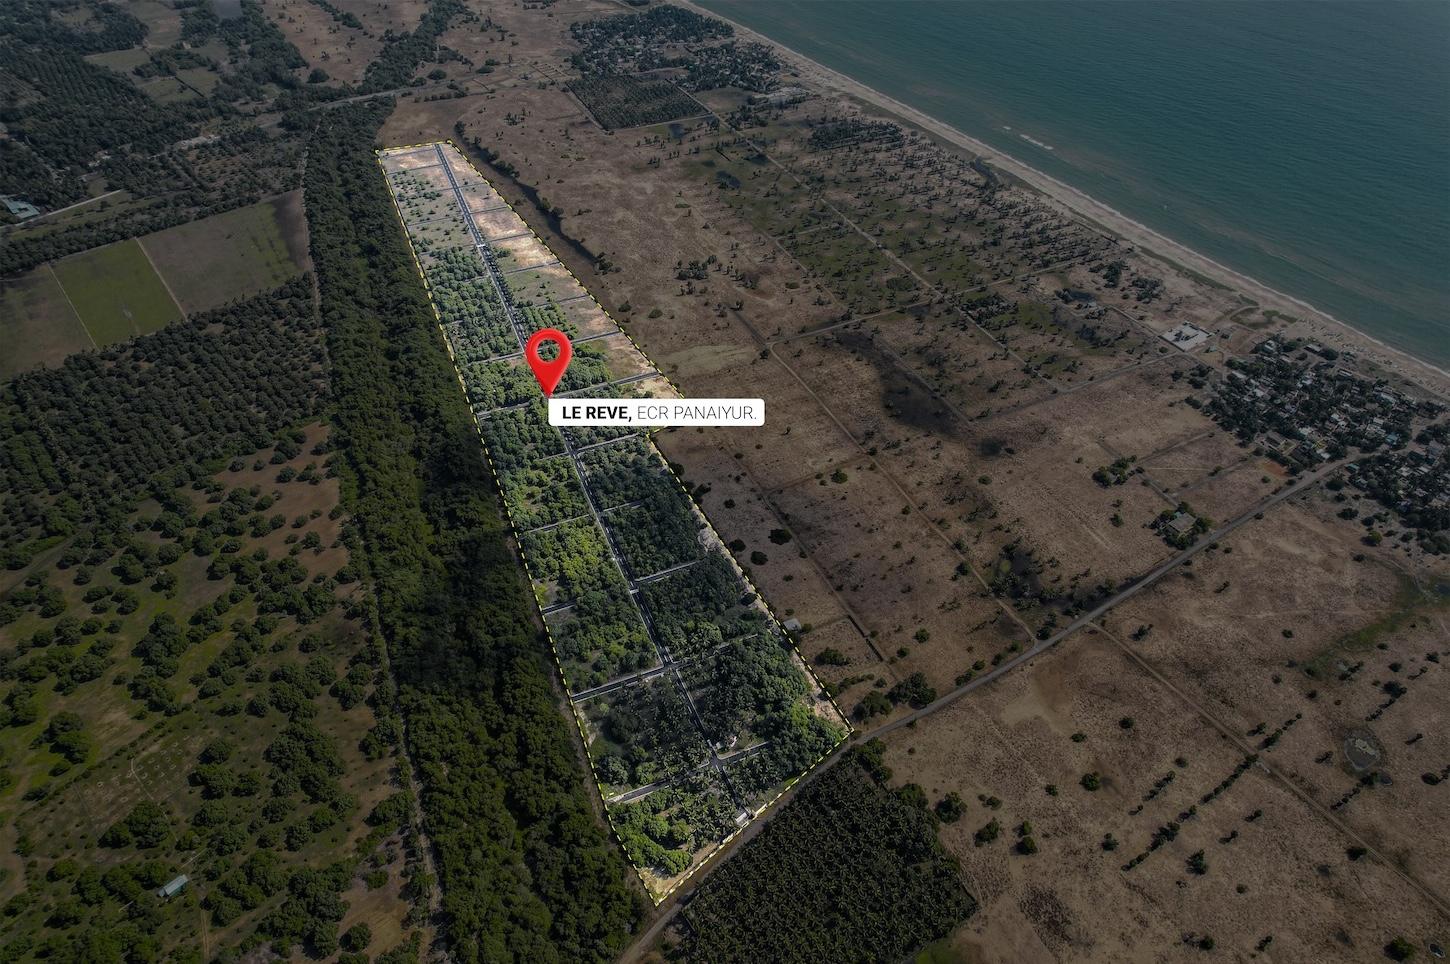 01 aerial view marked - DTCP Plots near Beach in Panaiyur - ECR